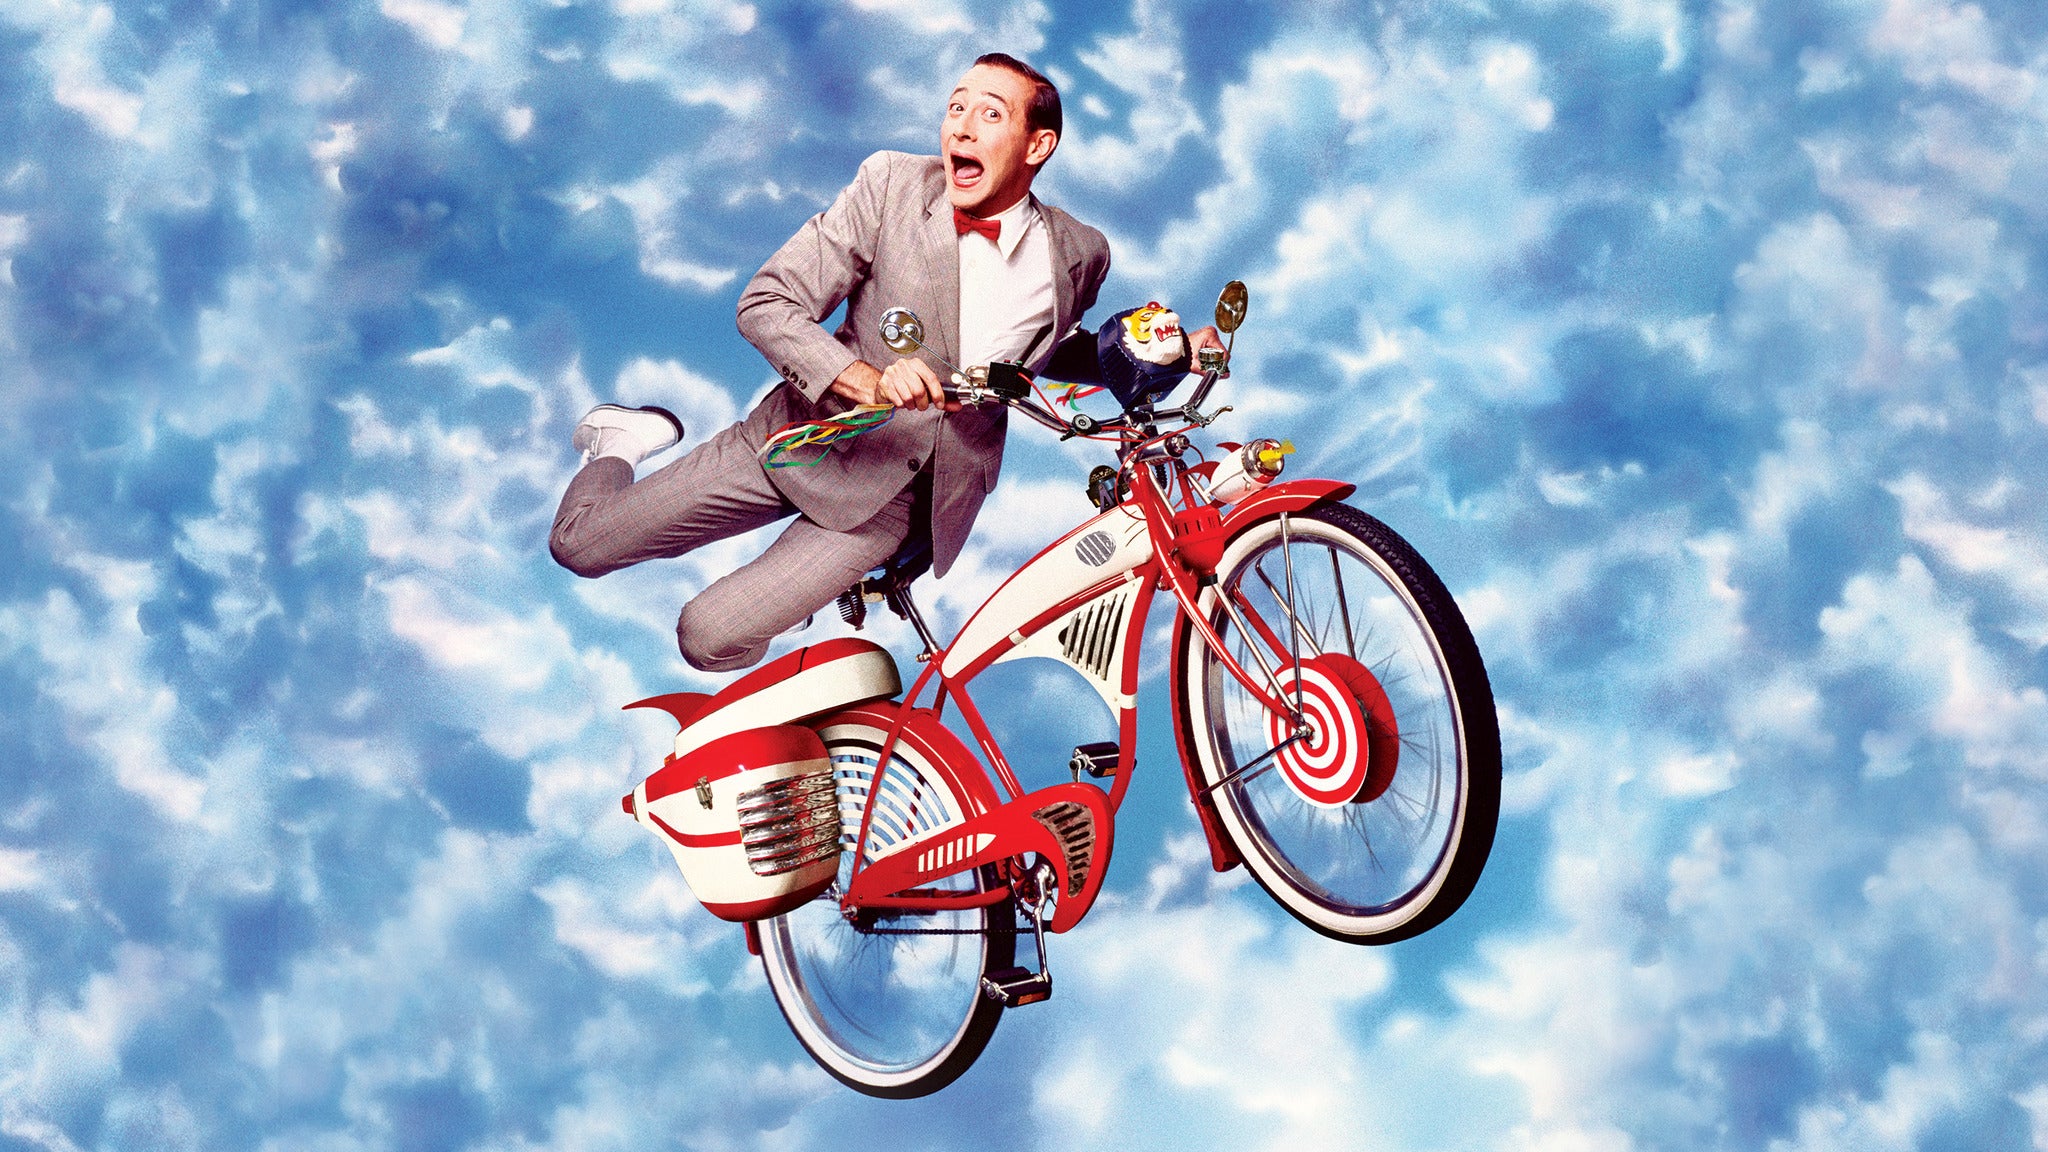 Pee-wee's Big Adventure 35th Anniversary Tour with Paul Reubens in New York promo photo for Local presale offer code